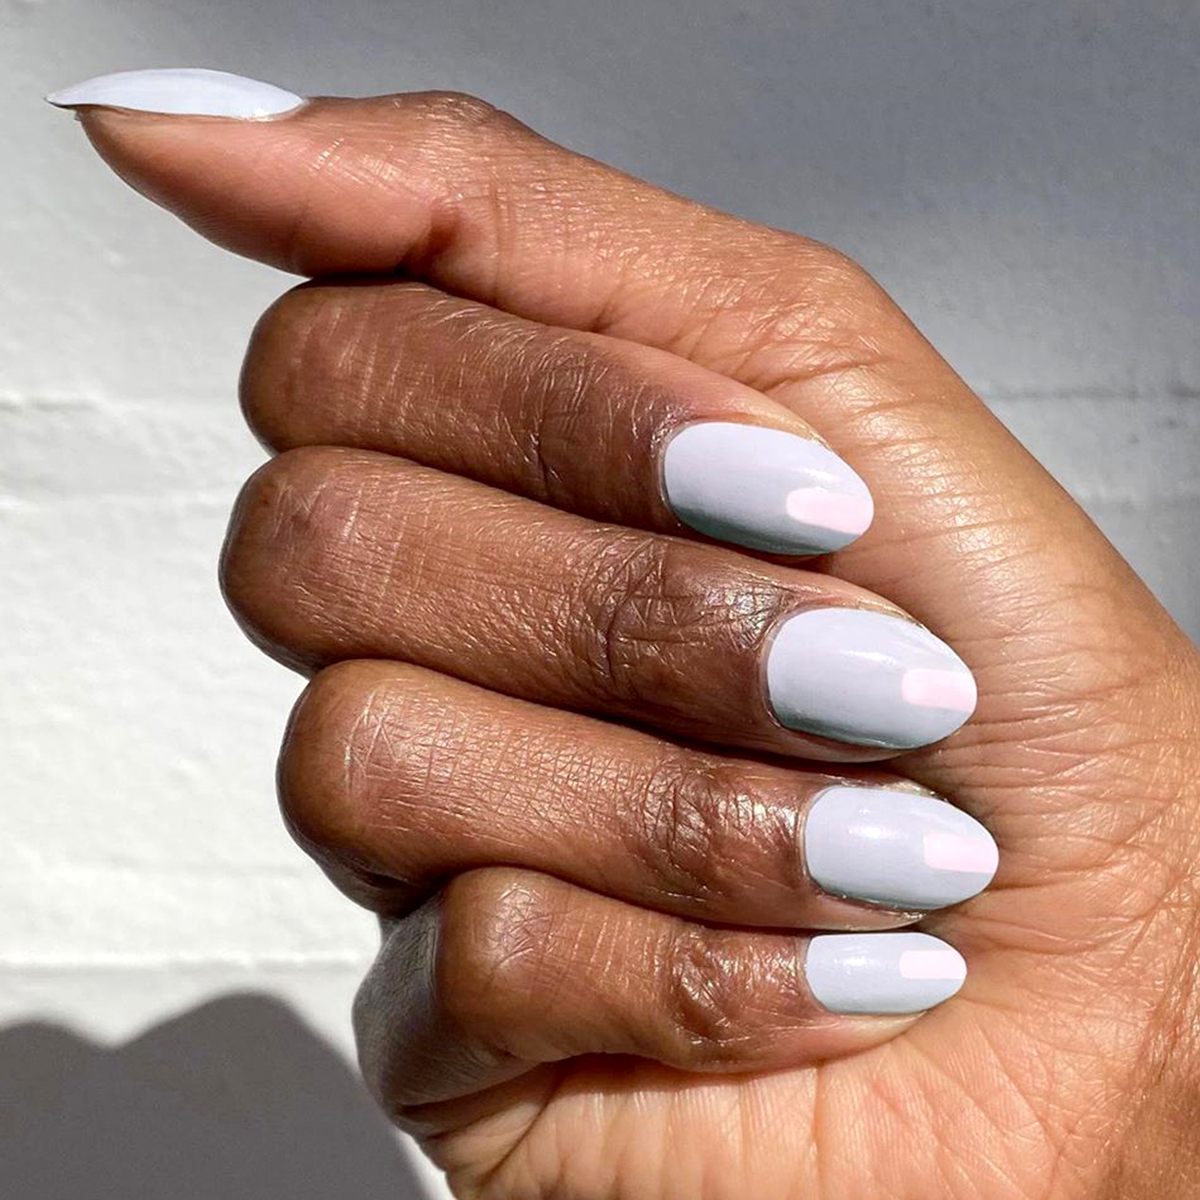 Pastel Nail Colors You Might As Well Start Test Driving for Spring